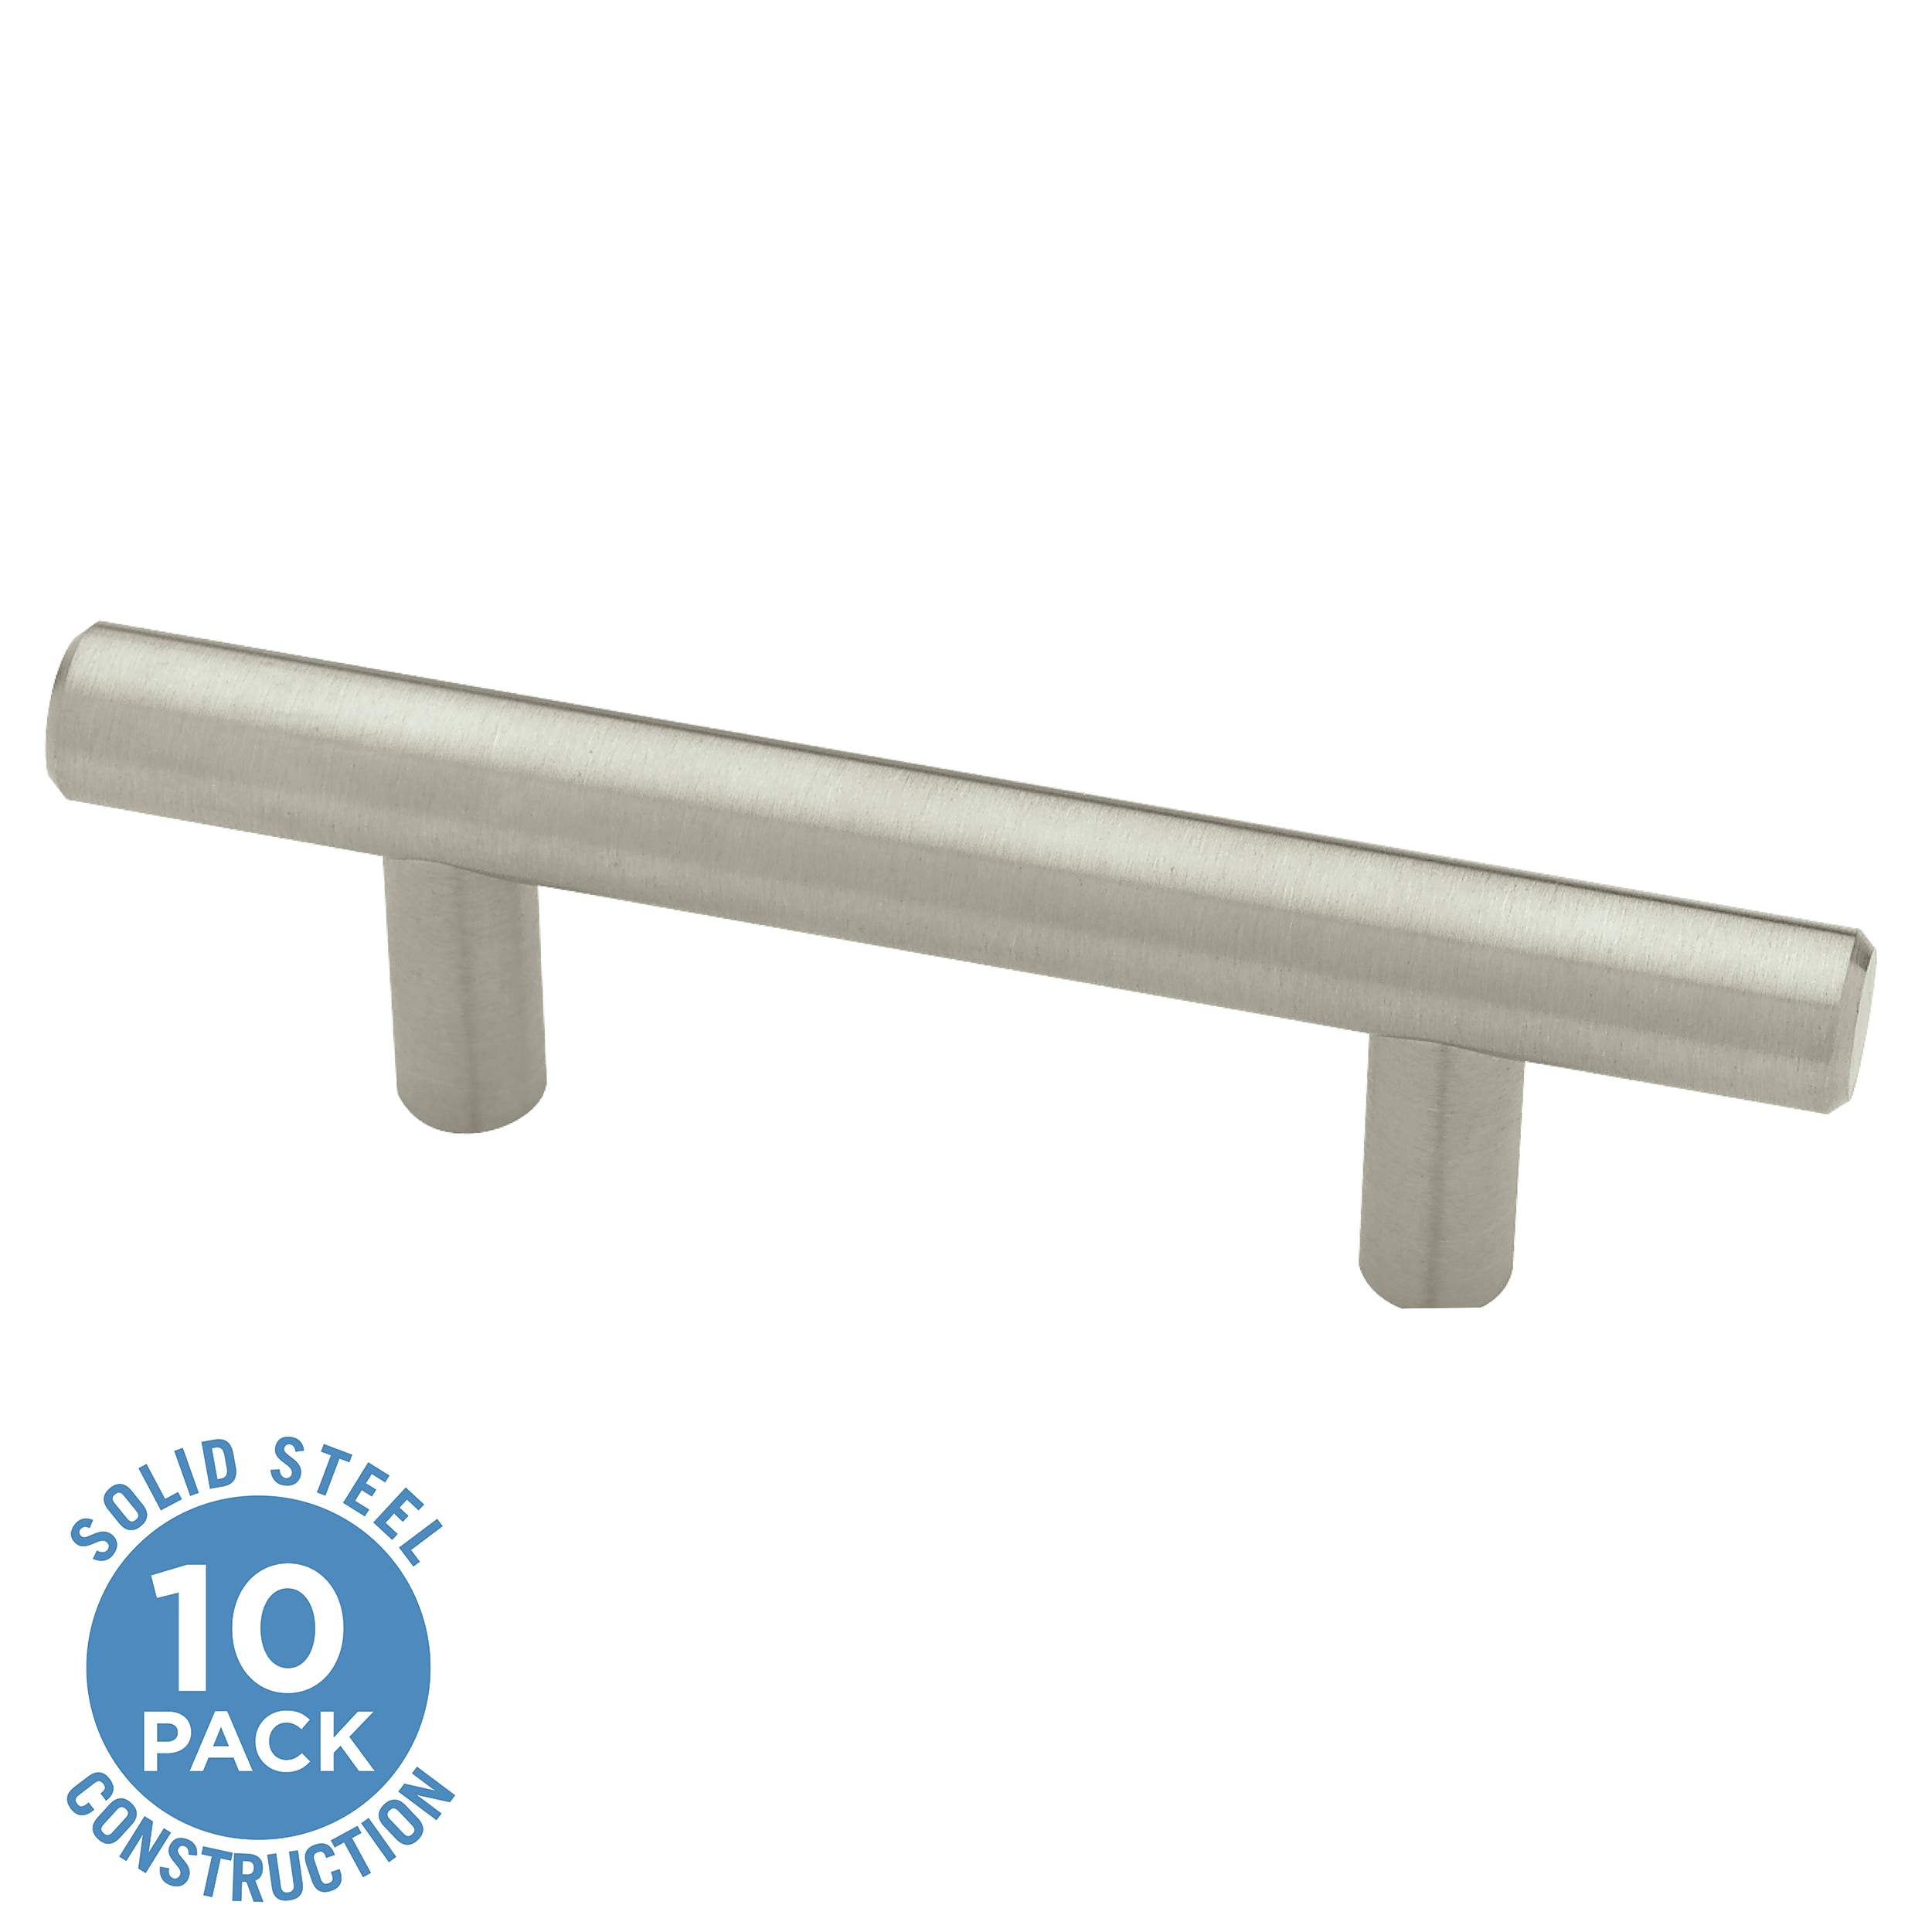 Rdeghly Drawer Pull, Drawer Handle,Modern Kitchen Cabinet Furniture Handles  Finger Pull Contemporary Metal Edge Pull